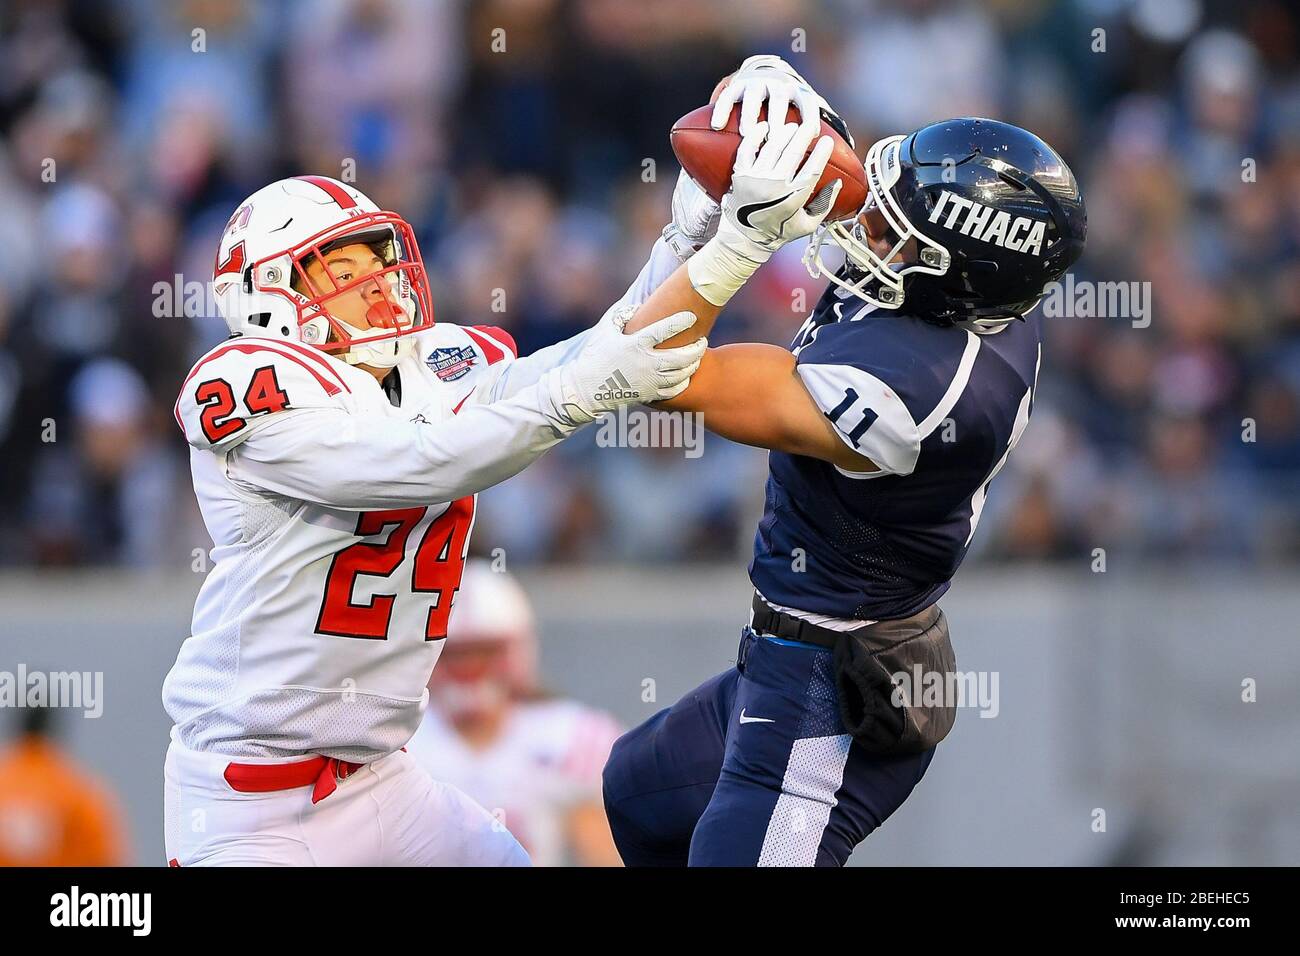 November 16, 2019: Ithaca Bombers wide receiver Jacob Cooney #11 catches a pass as Cortland Red Dragons linebacker Dylan Studer #11 defends during the 2019 Cortaca Jug NCAA football game on Saturday Nov., 16, 2019, at MetLife Stadium in East Rutherford, New Jersey. Ithaca won 32-20. Rich Barnes/CSM Stock Photo